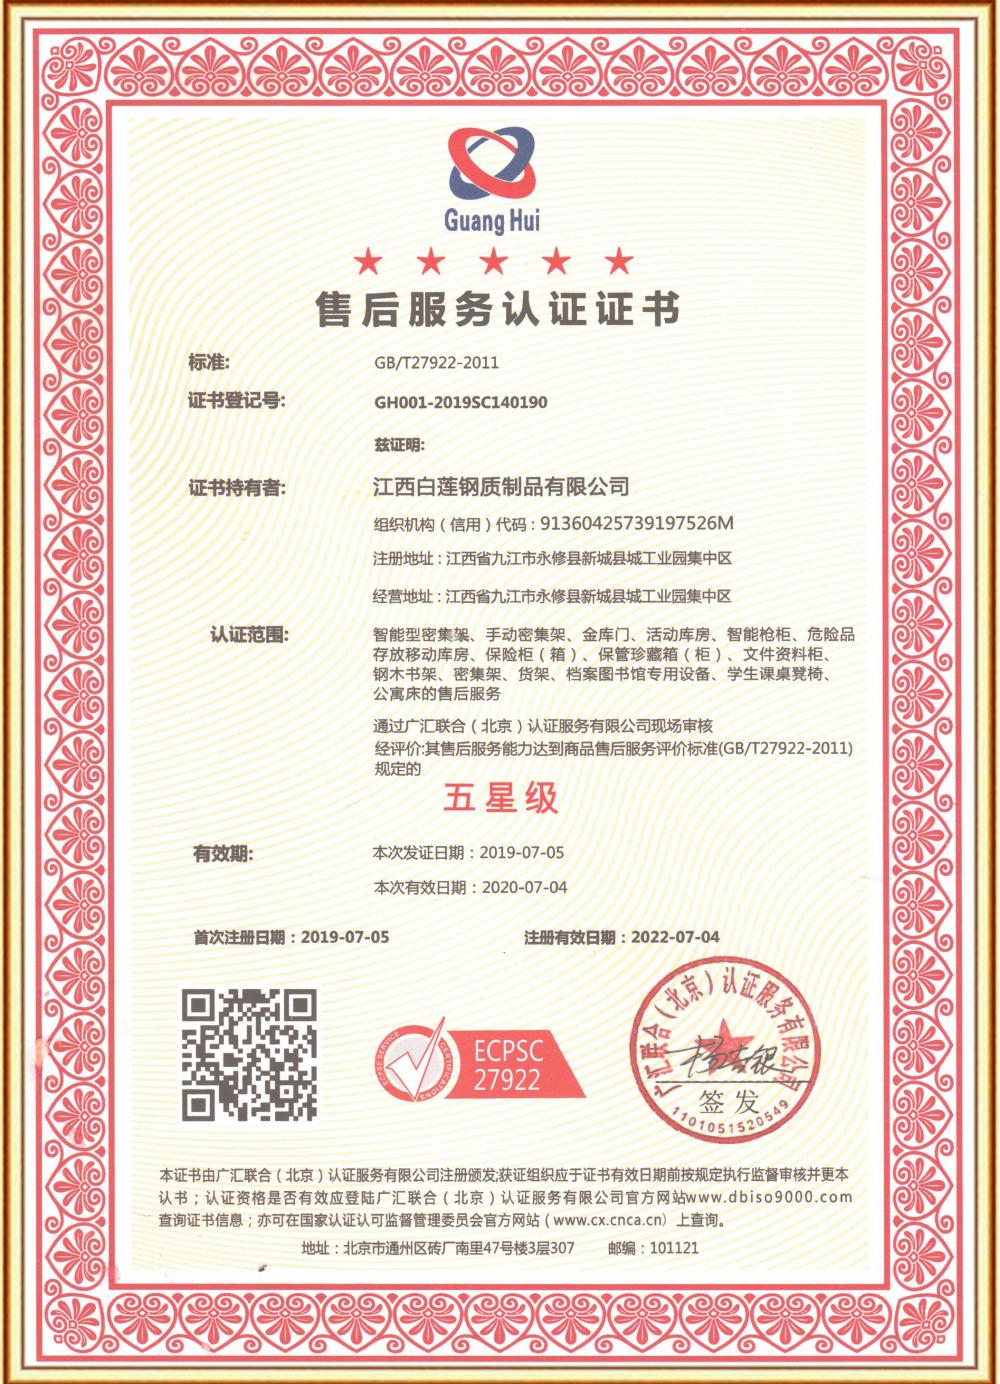 Certificate of after-sales service